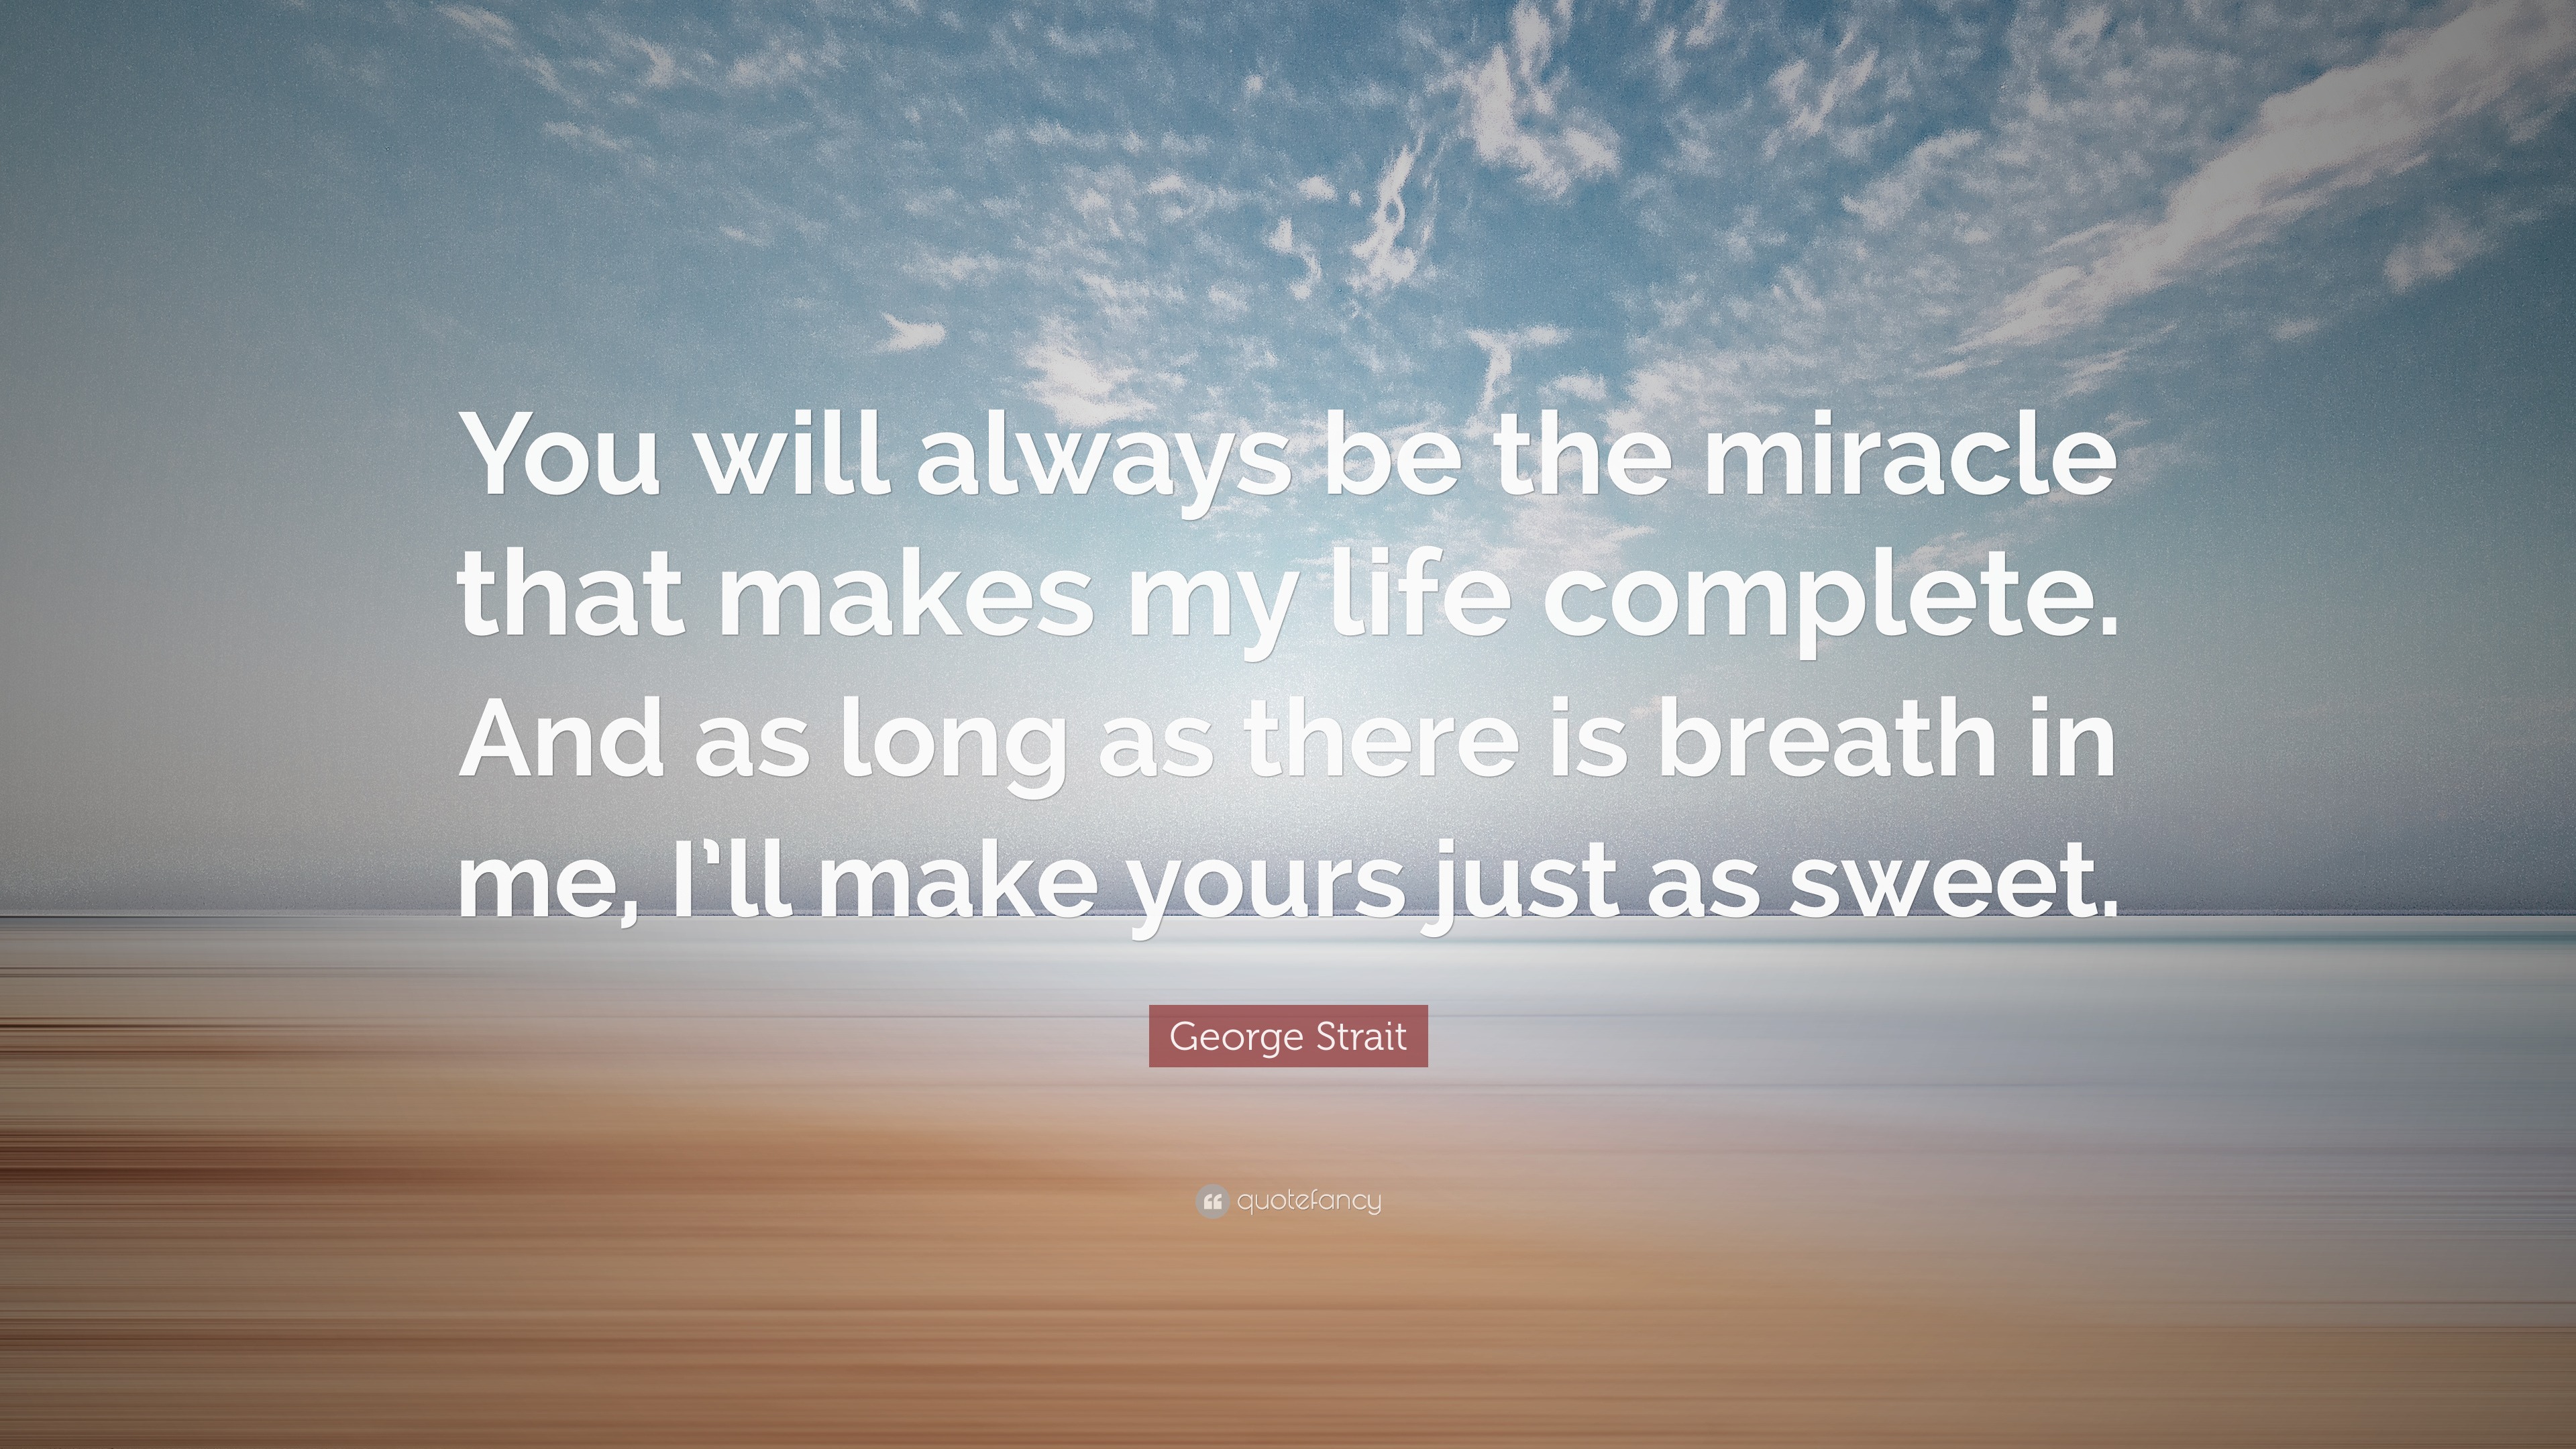 George Strait Quote “You will always be the miracle that makes my life plete